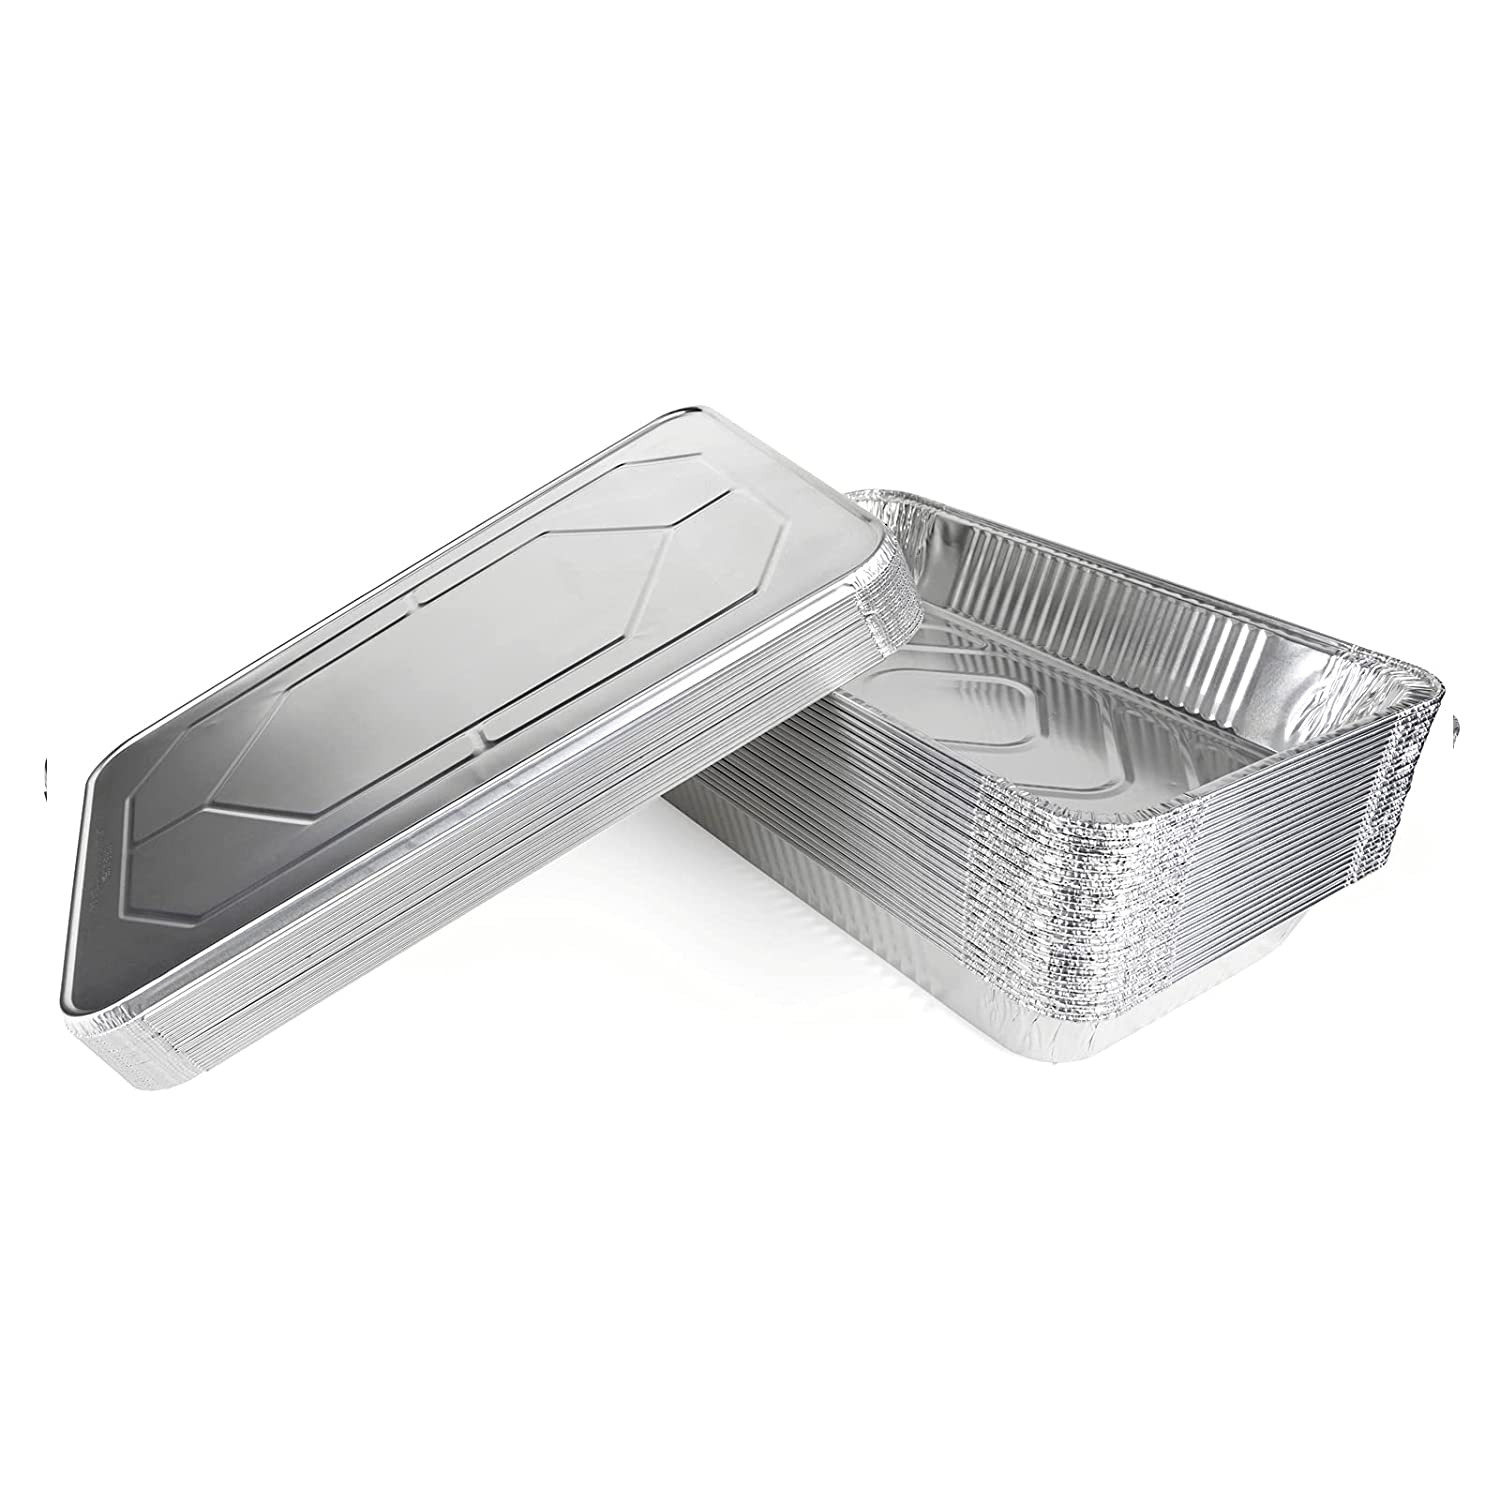 https://idlpack.com/image/cache/catalog/Products/Foil%20Pans%20and%20Trays/3deep-1500x1500.jpg